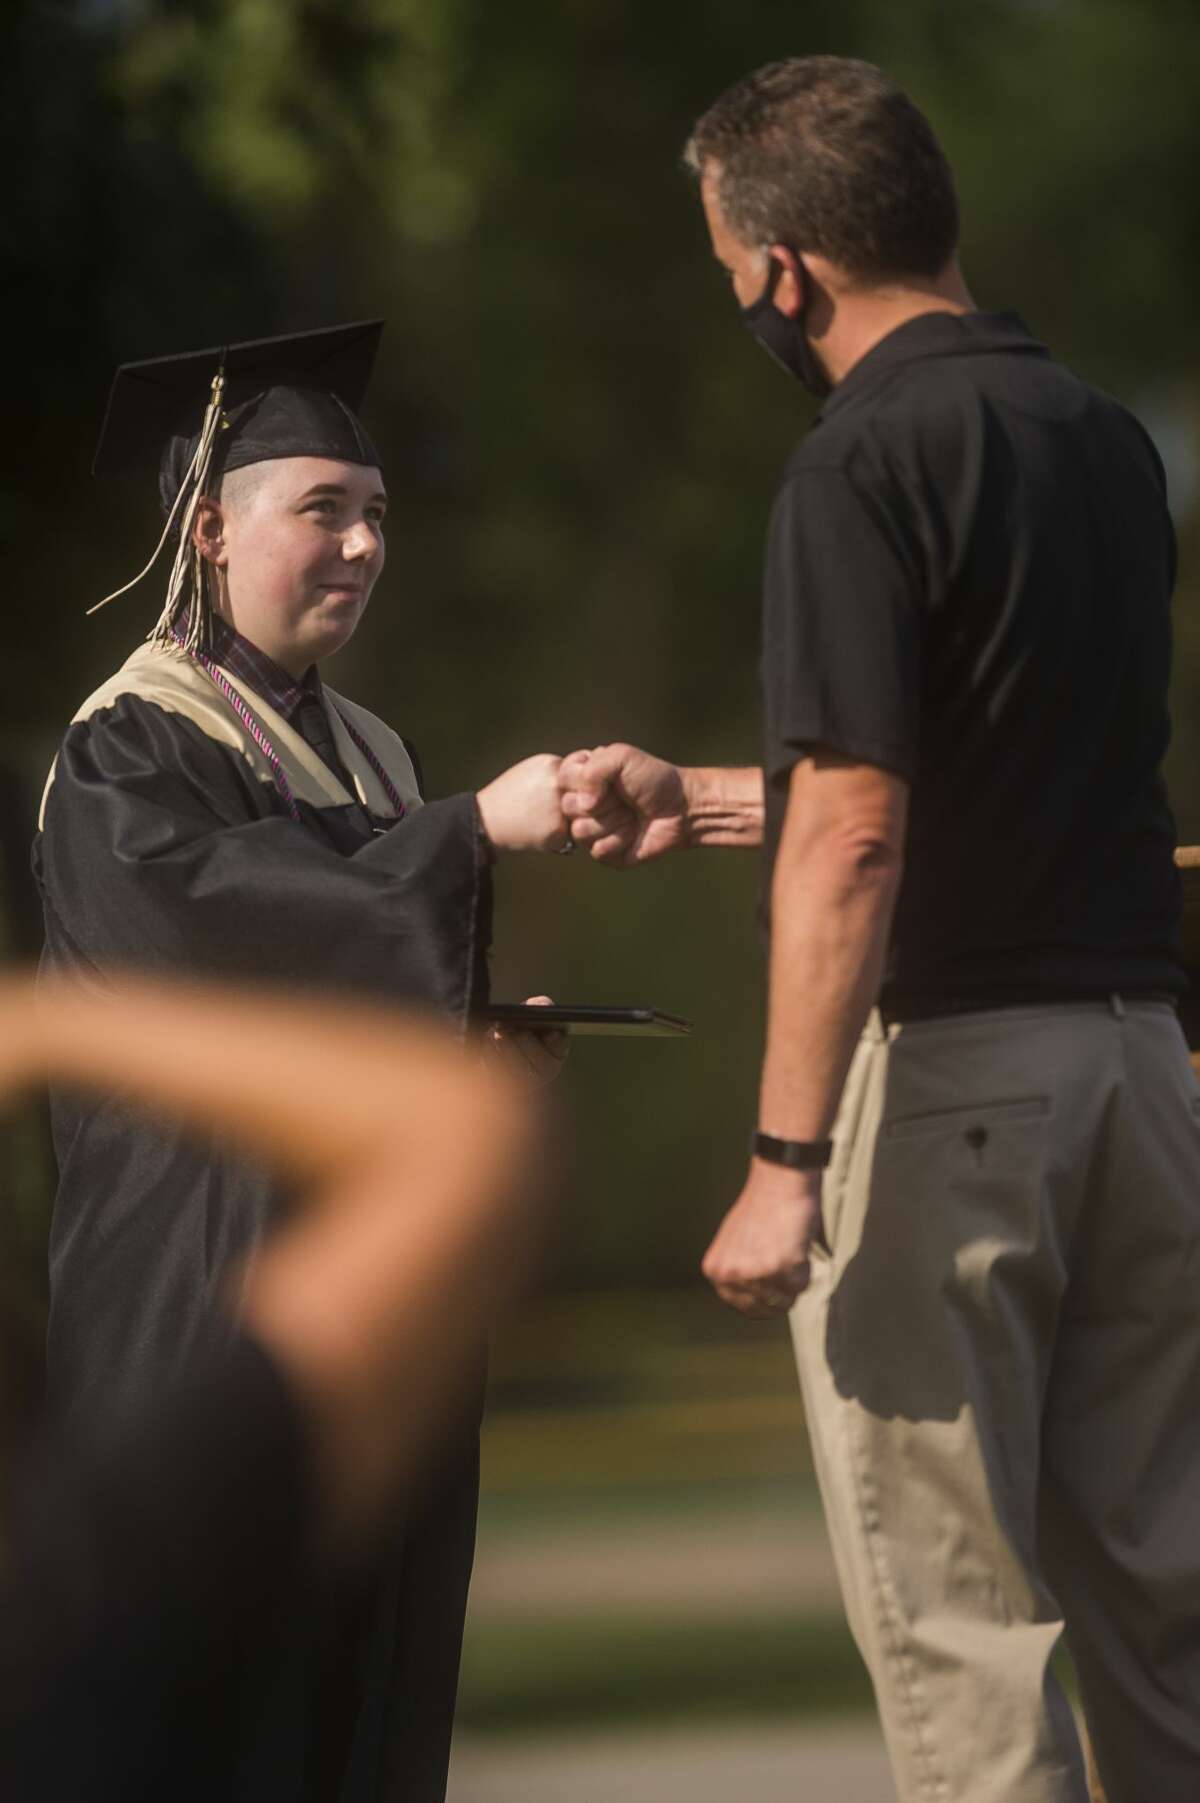 Graduating seniors from Bullock Creek High School celebrate with family and friends during a commencement ceremony Friday, Aug. 7, 2020 at the school. (Katy Kildee/kkildee@mdn.net)